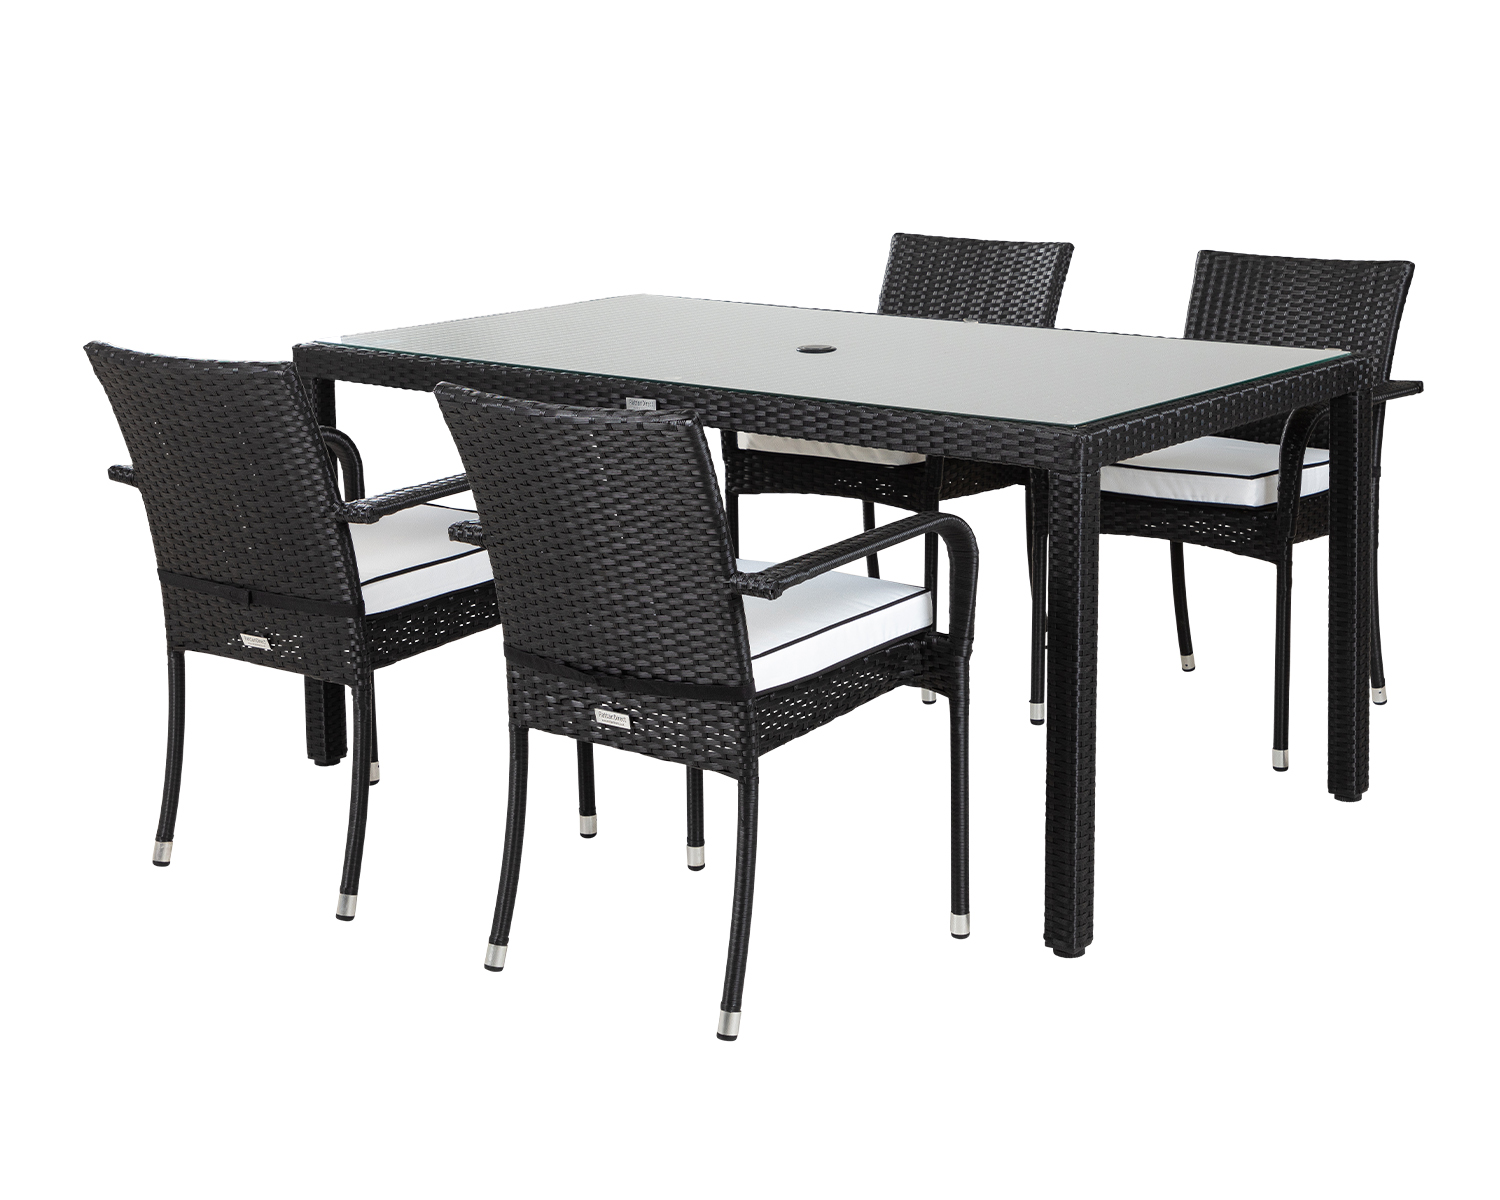 4 Rattan Garden Chairs Amp Small Rectangular Dining Table Set In Black Amp White Roma Rattan Direct